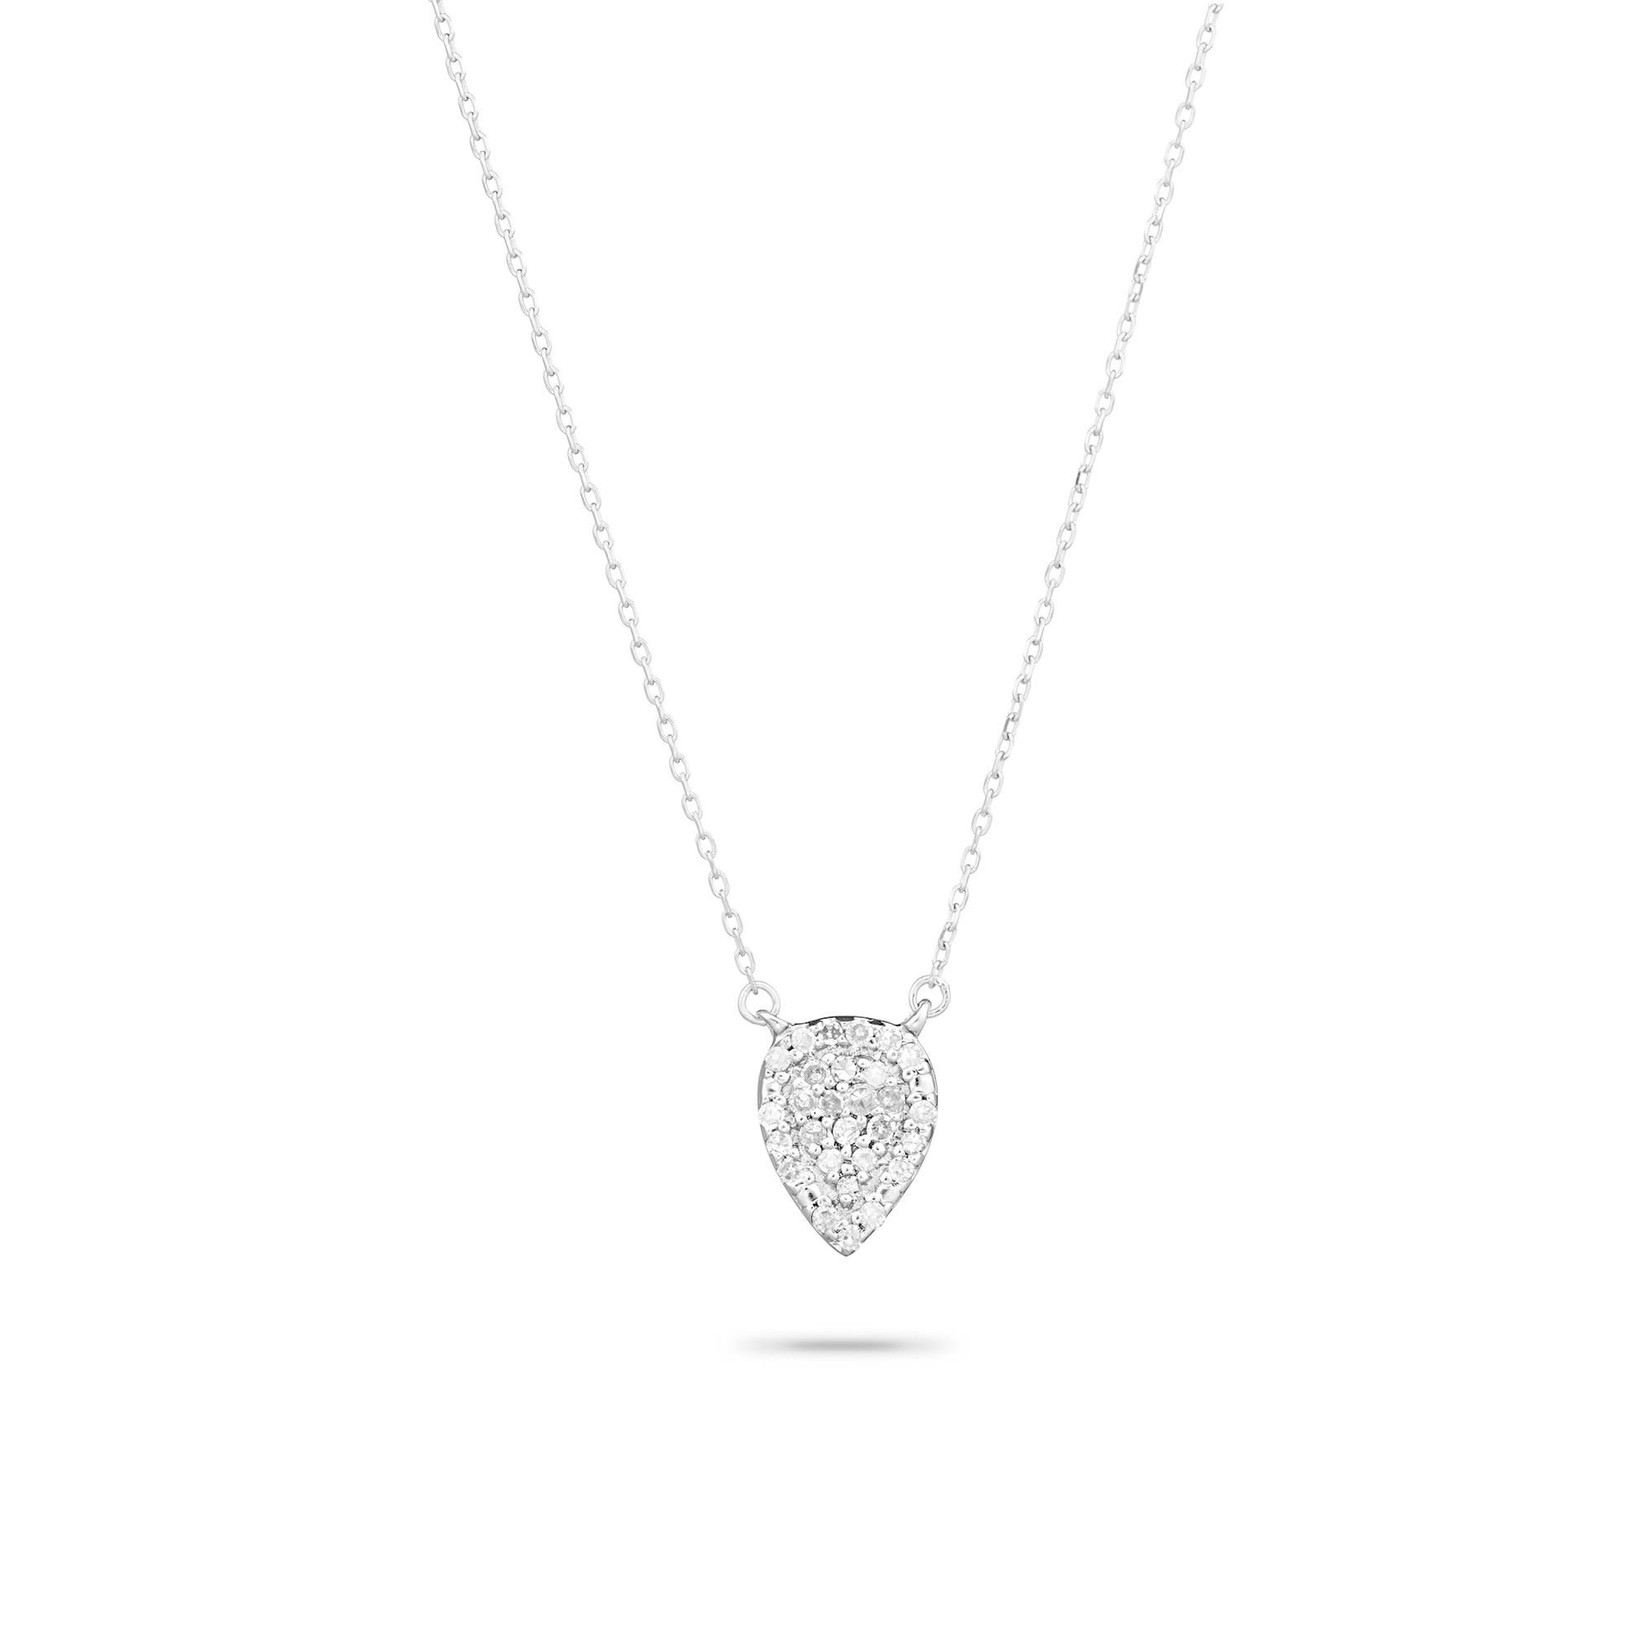 Solid Pave Teardrop Diamond Necklace- White Gold